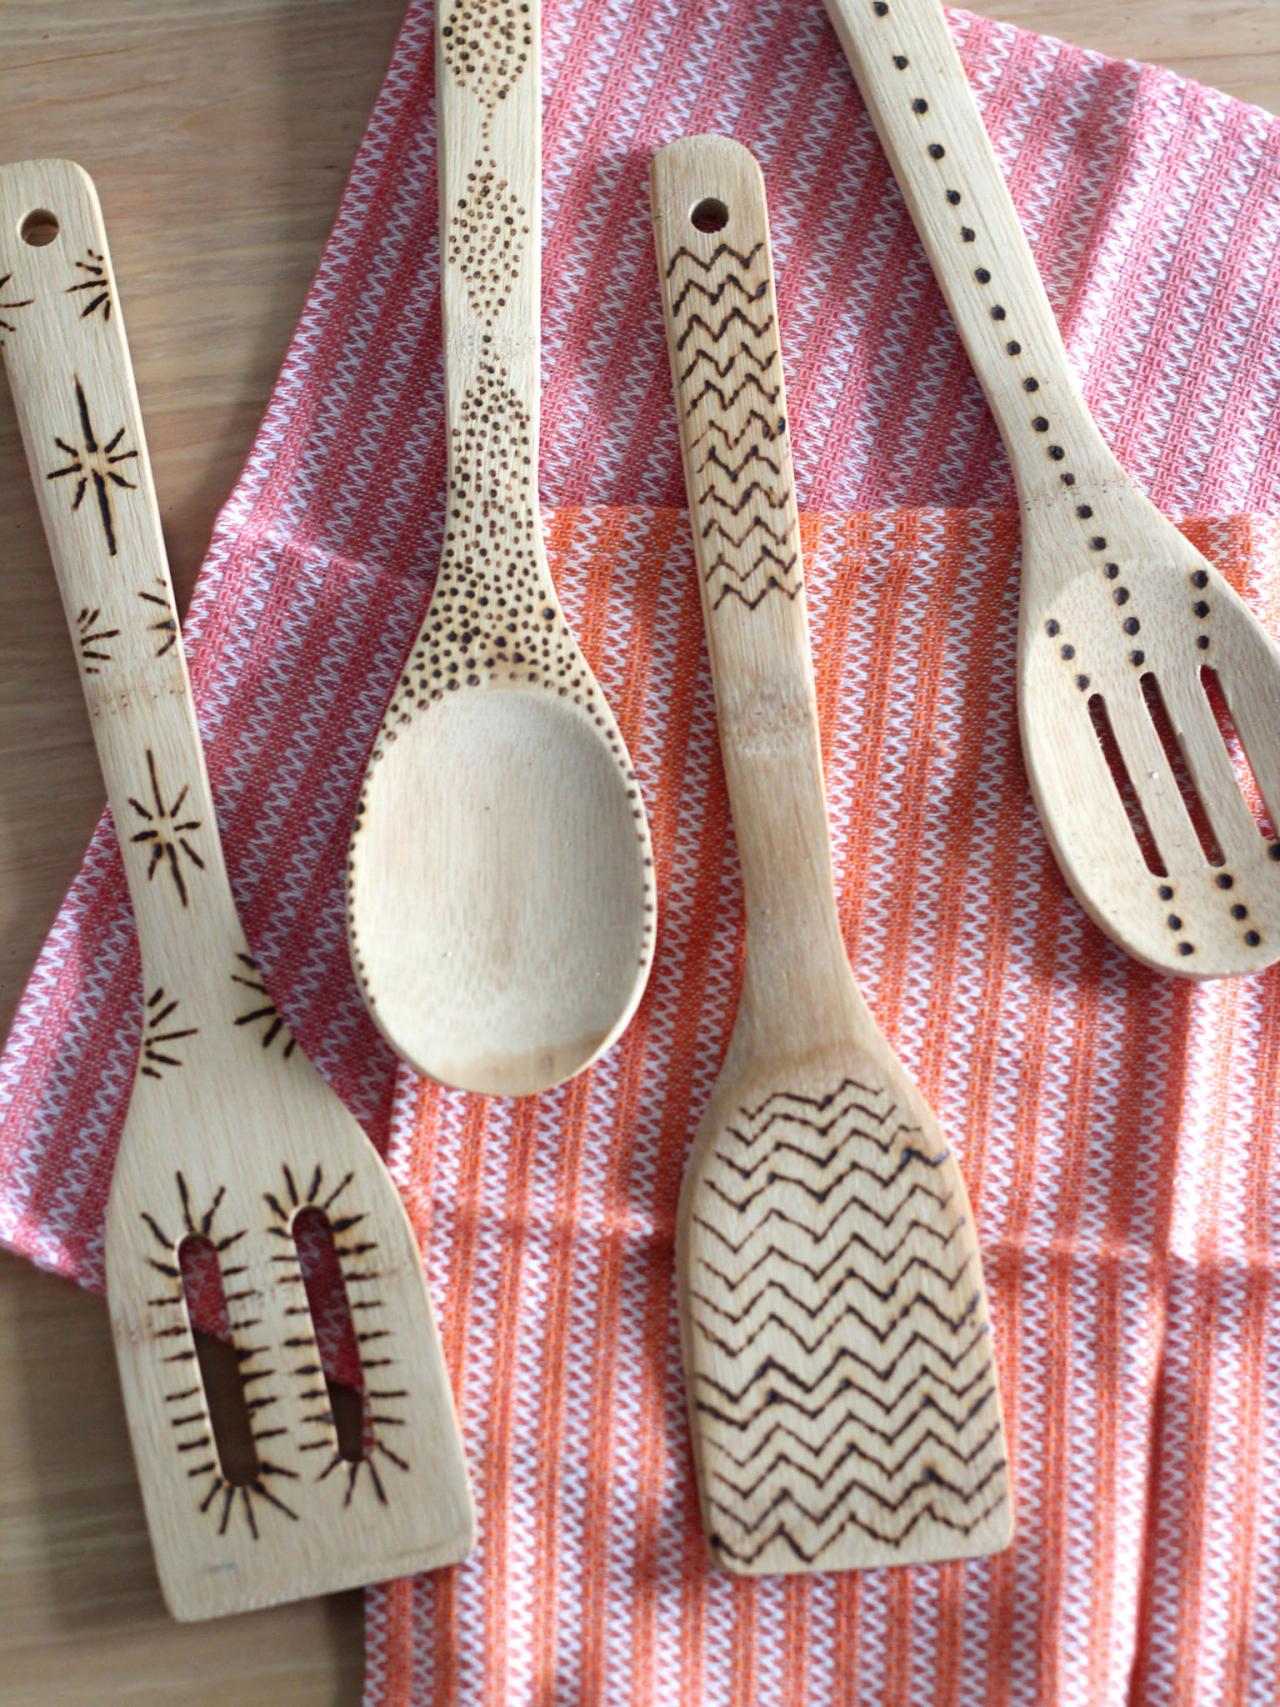 Variety of wood spoons and spatula with pattern